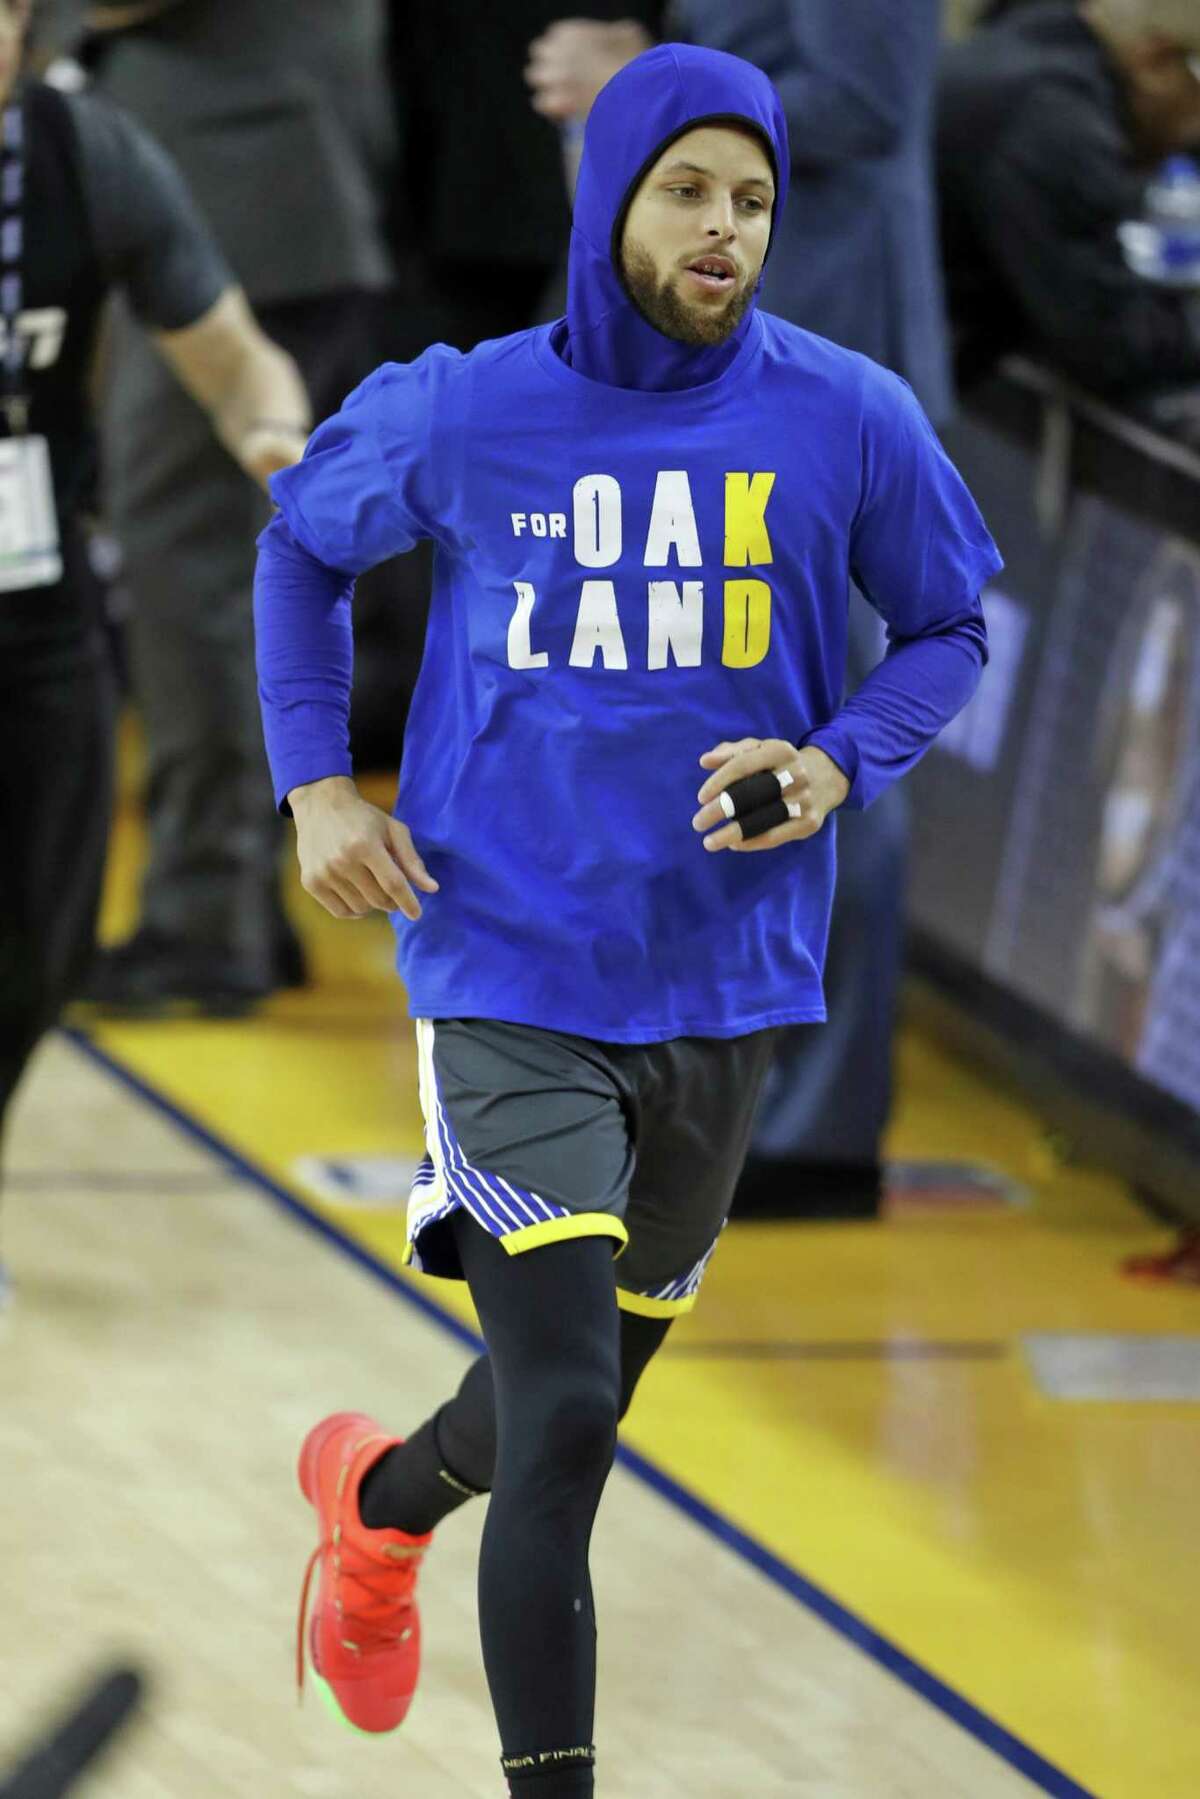 Golden State Warriors' Stephen Curry arrives for warm ups wearing a t-shirt honoring Oakland and Kevin Durant before playing Toronto Raptors in Game 6 of NBA Finals at Oracle Arena in Oakland, Calif., on Thursday, June 13, 2019.